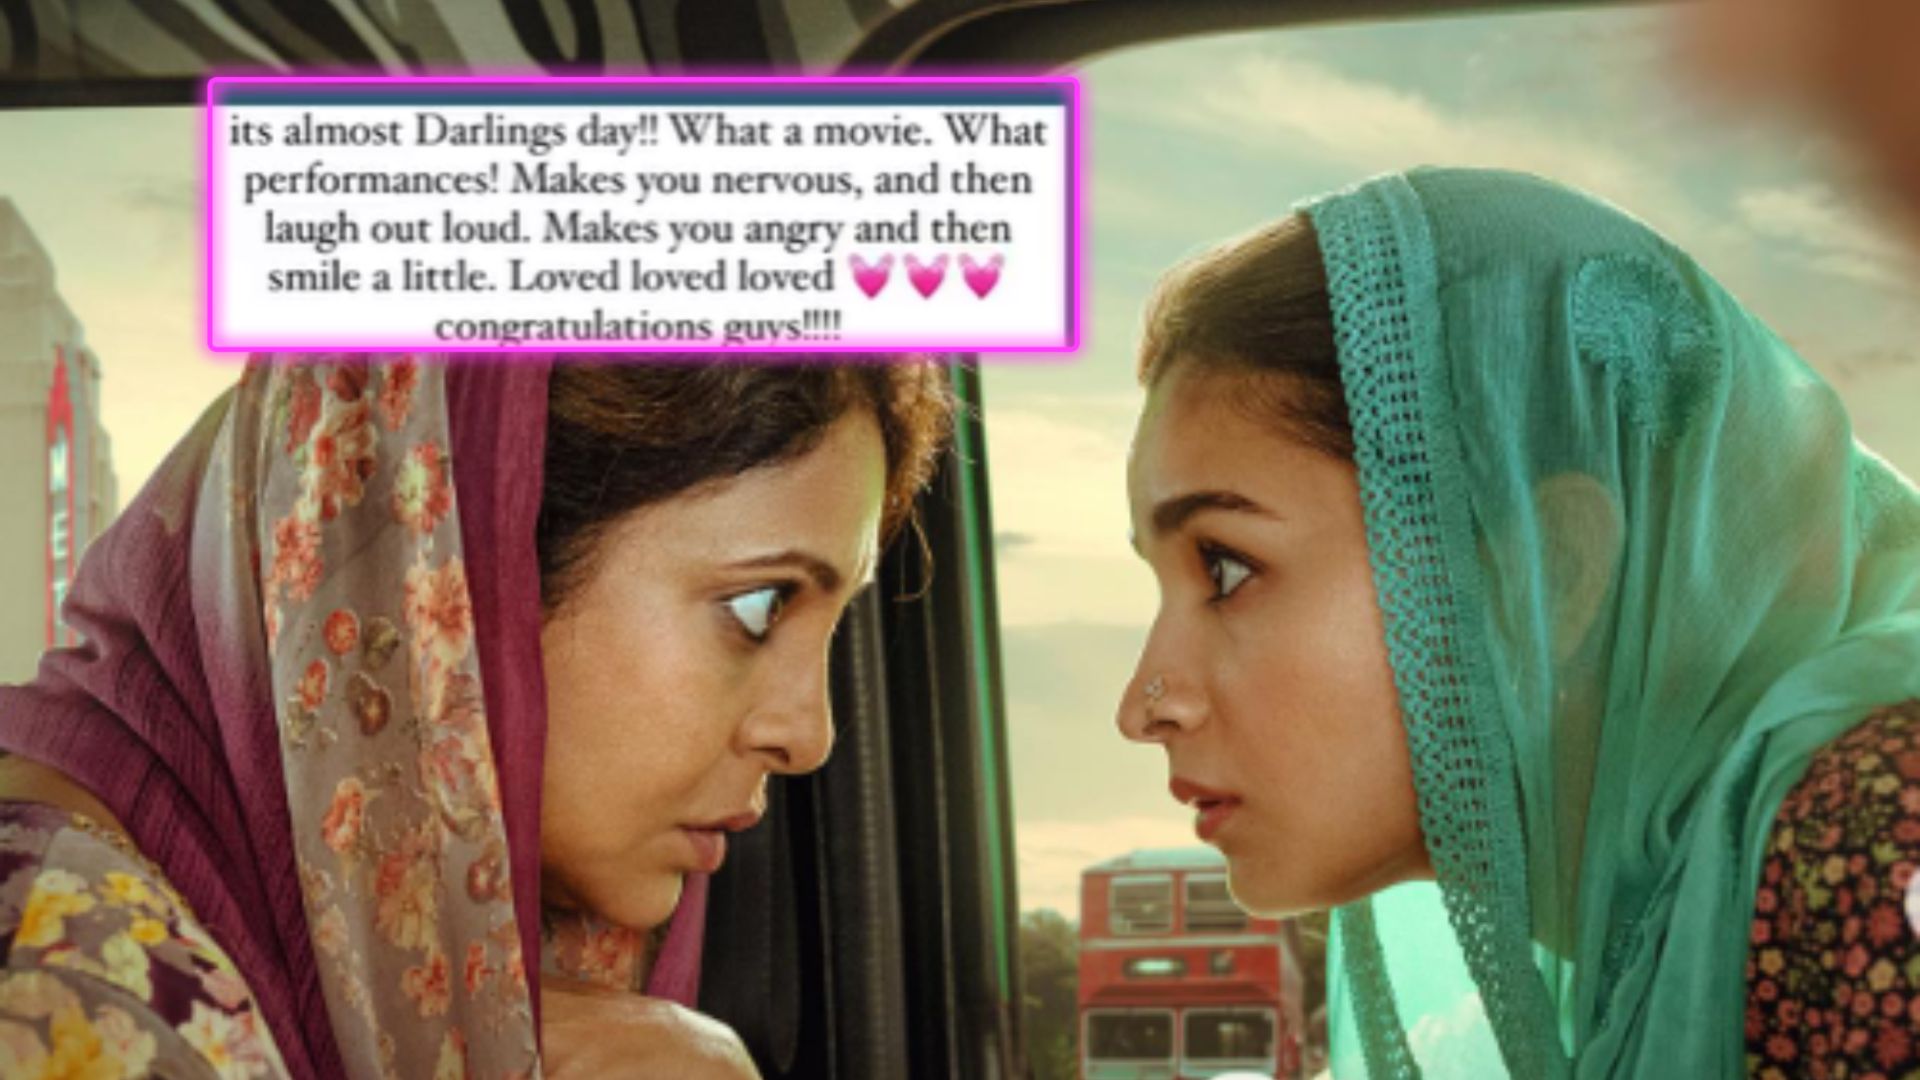 Celebrities Hail Alia Bhatt Starrer ‘Darlings’ For Delivering A Strong Message With Balanced Comic Timings